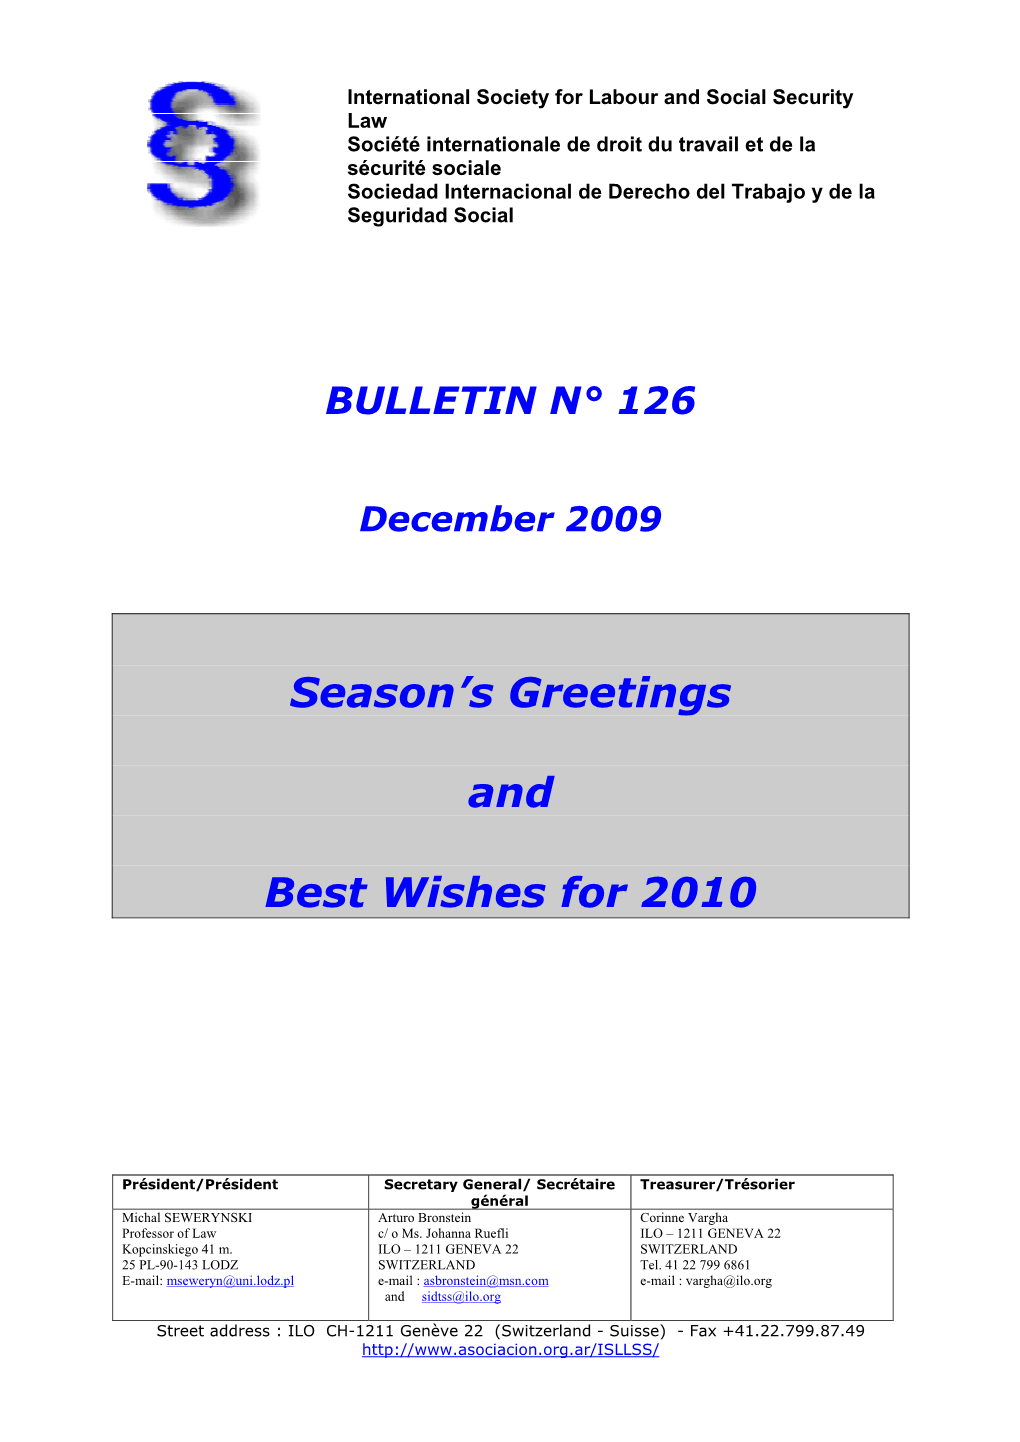 Season's Greetings and Best Wishes for 2010